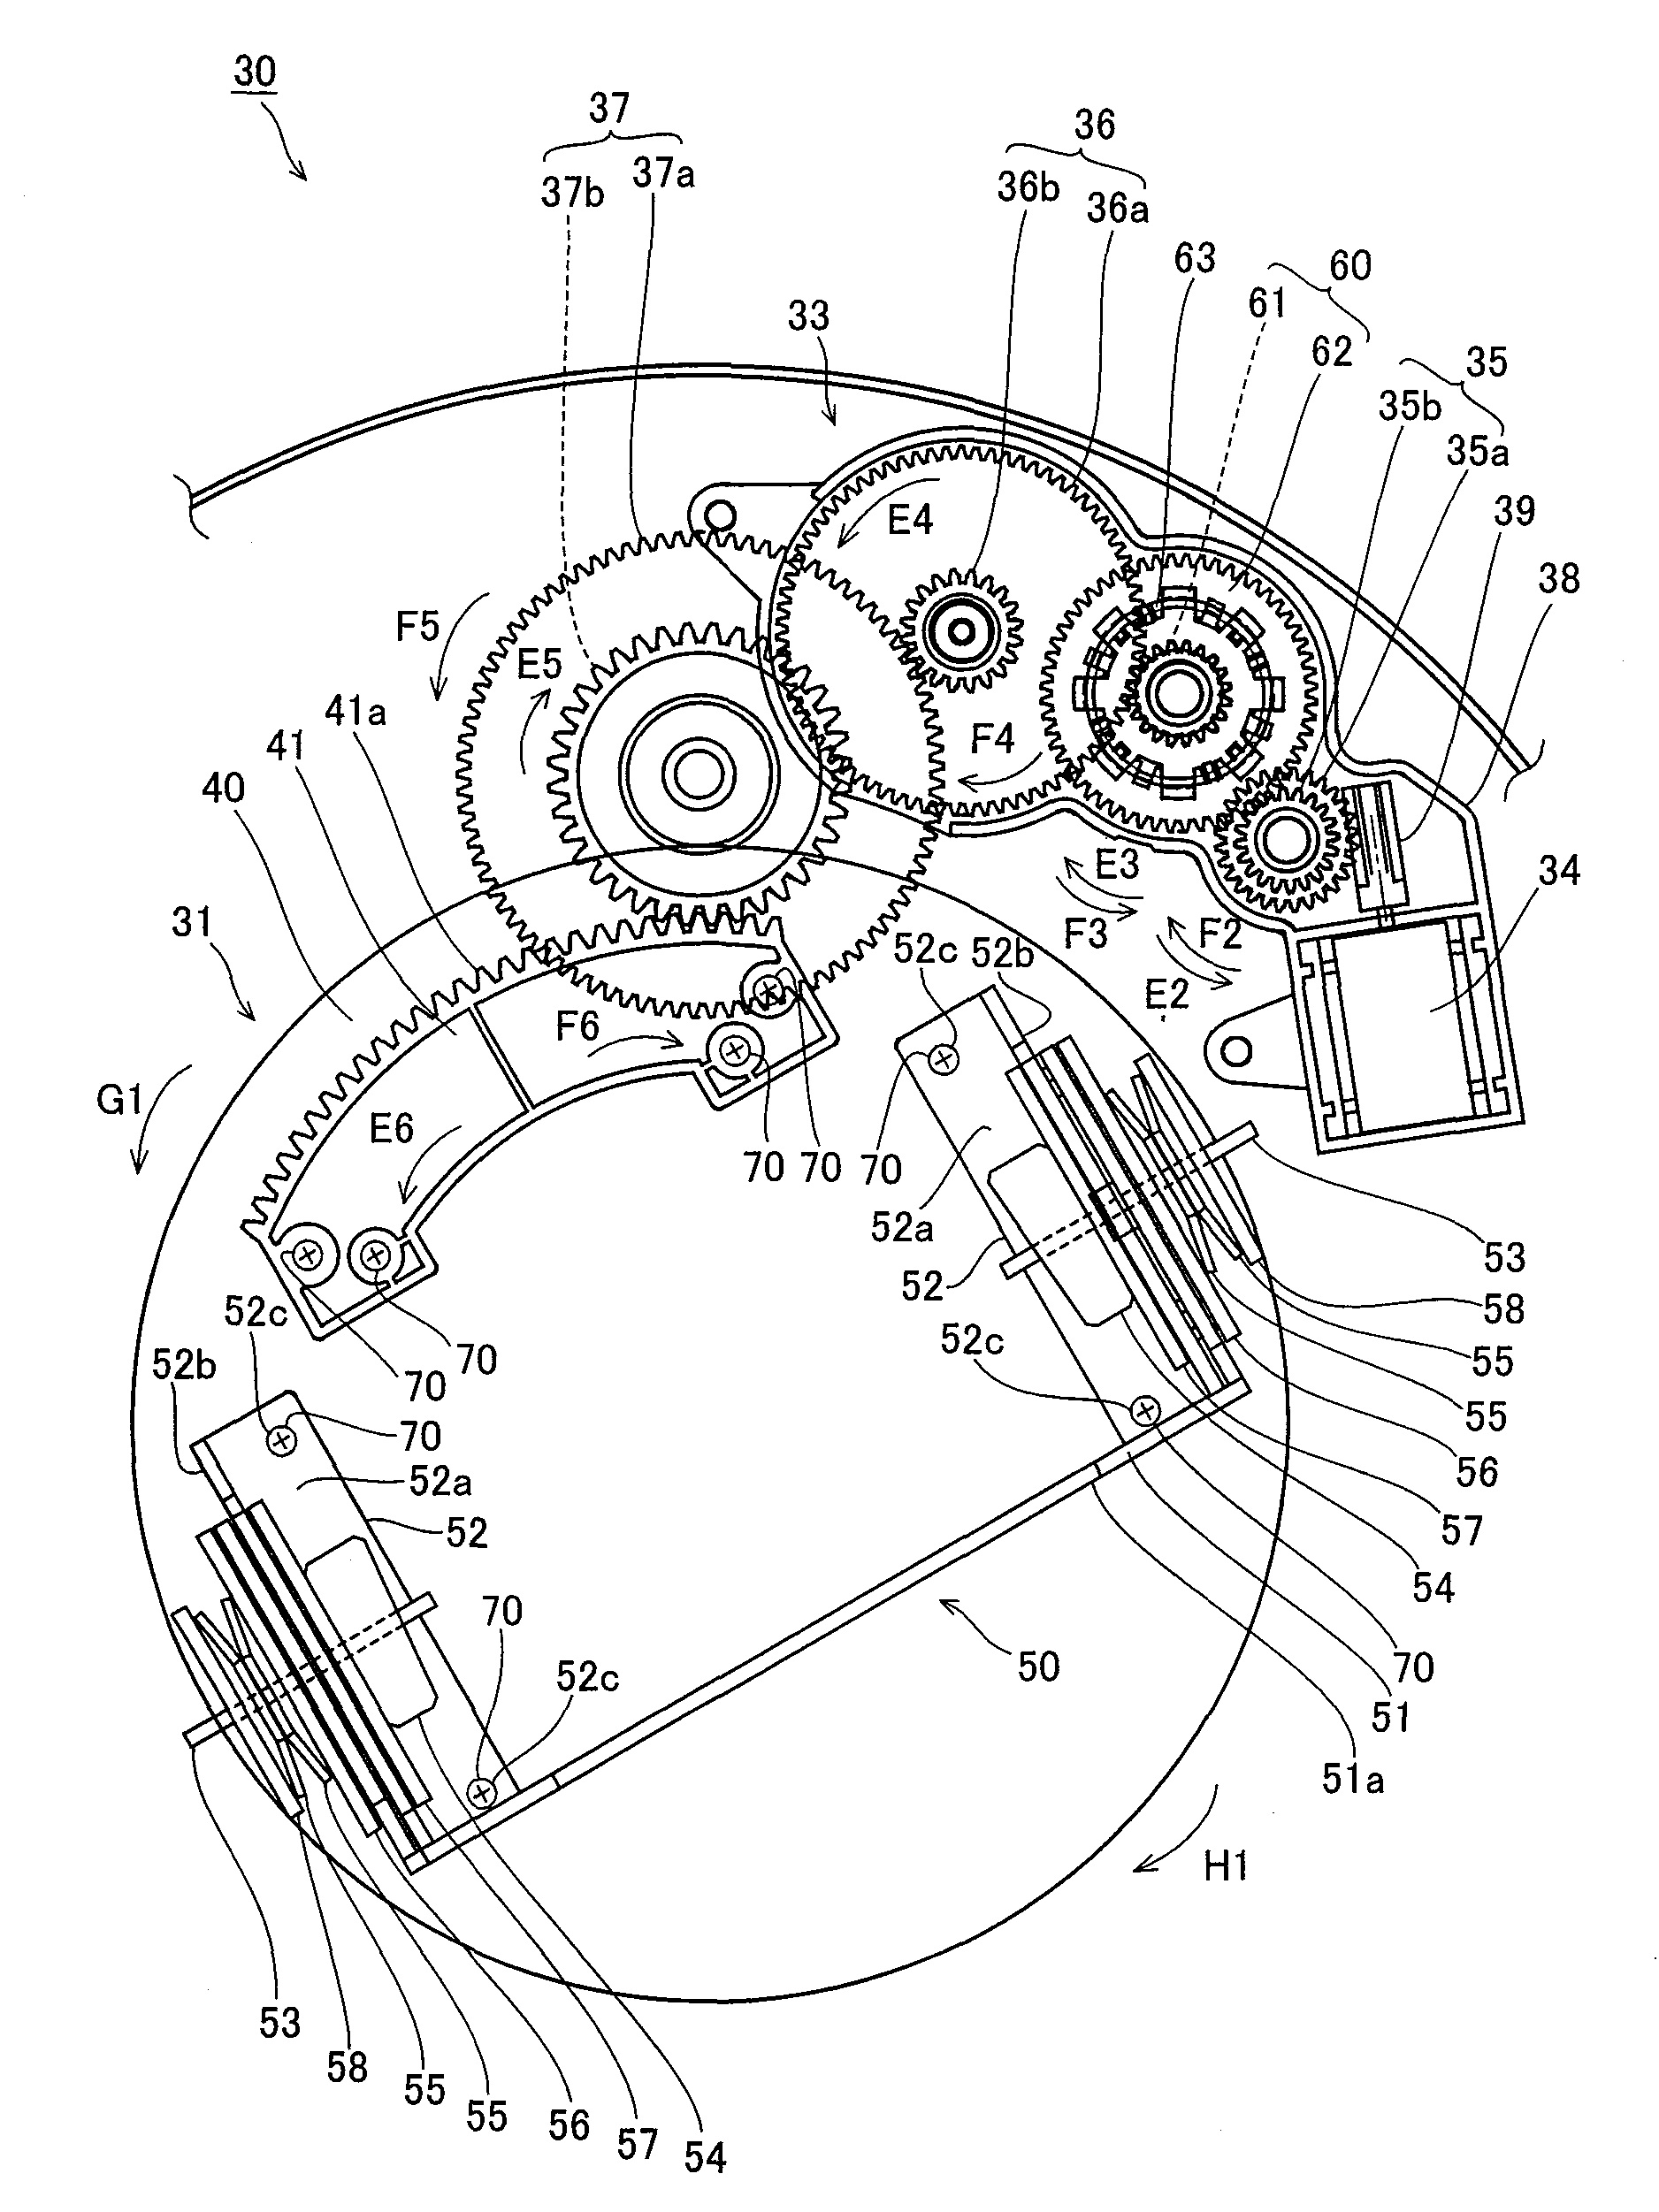 Display Base Including Torque Limiter and Torque Limiter